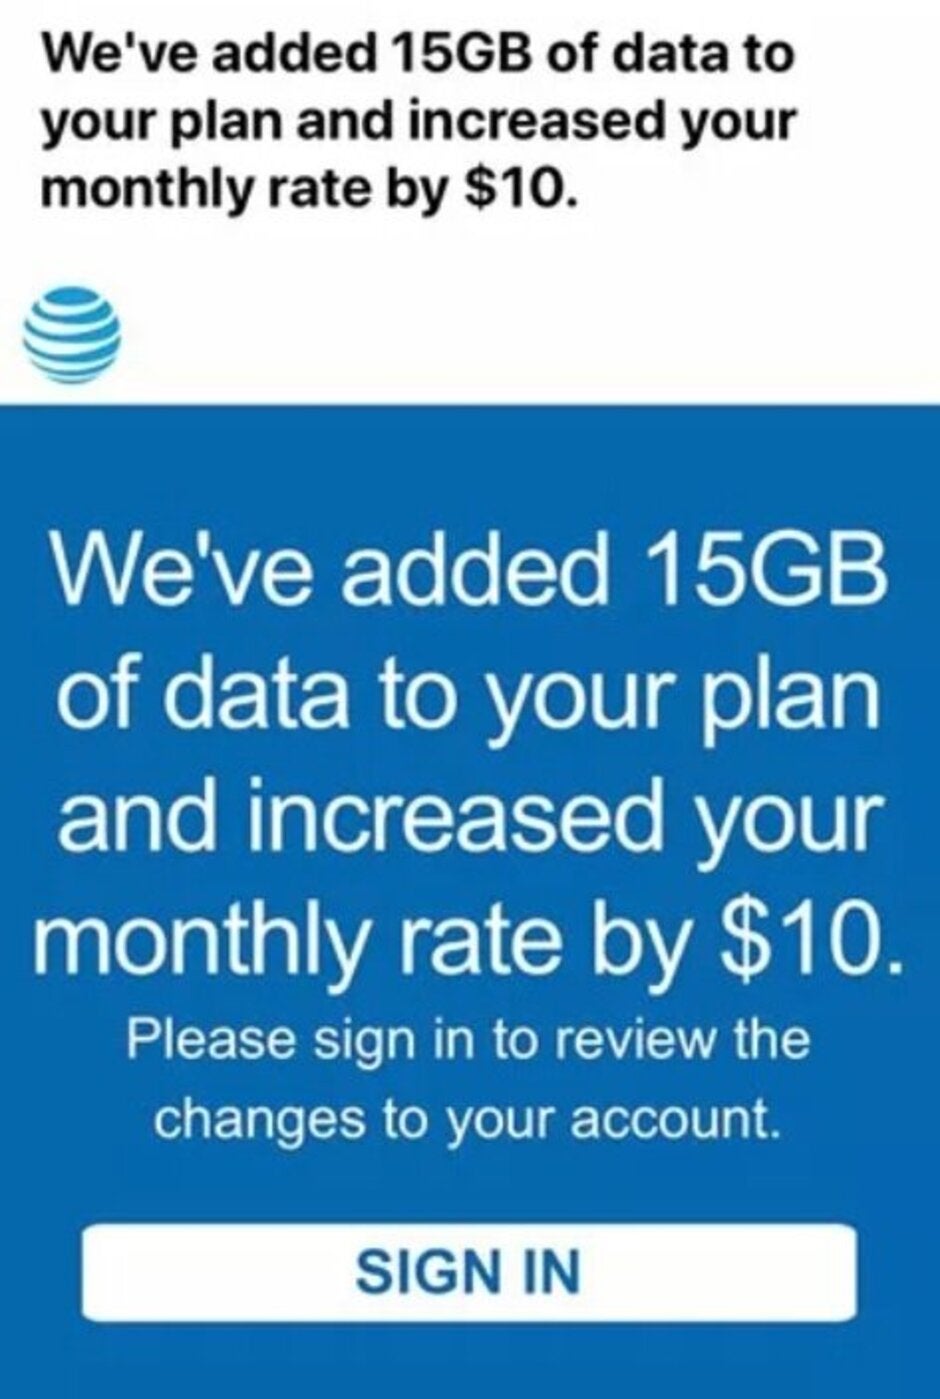 Doesn&#039;t look like AT&amp;amp;T customers who received this notice have a choice, does it? - AT&amp;T moves grandfathered subscribers into pricier plans unilaterally